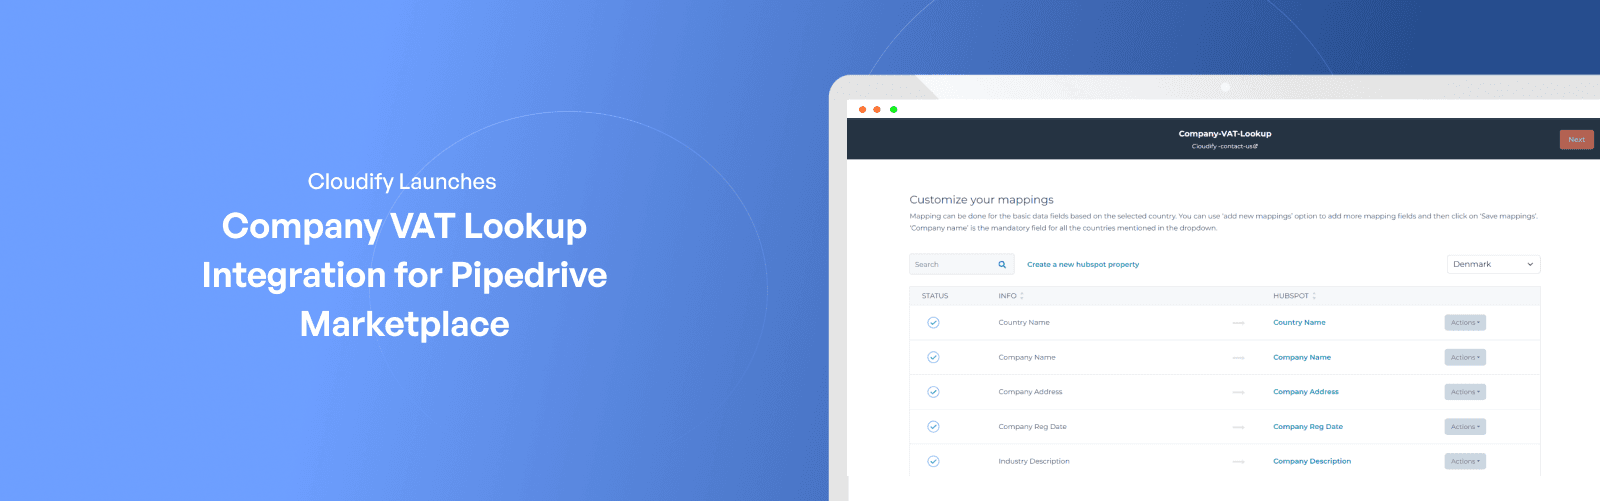 Company VAT Lookup Integration for Pipedrive Marketplace